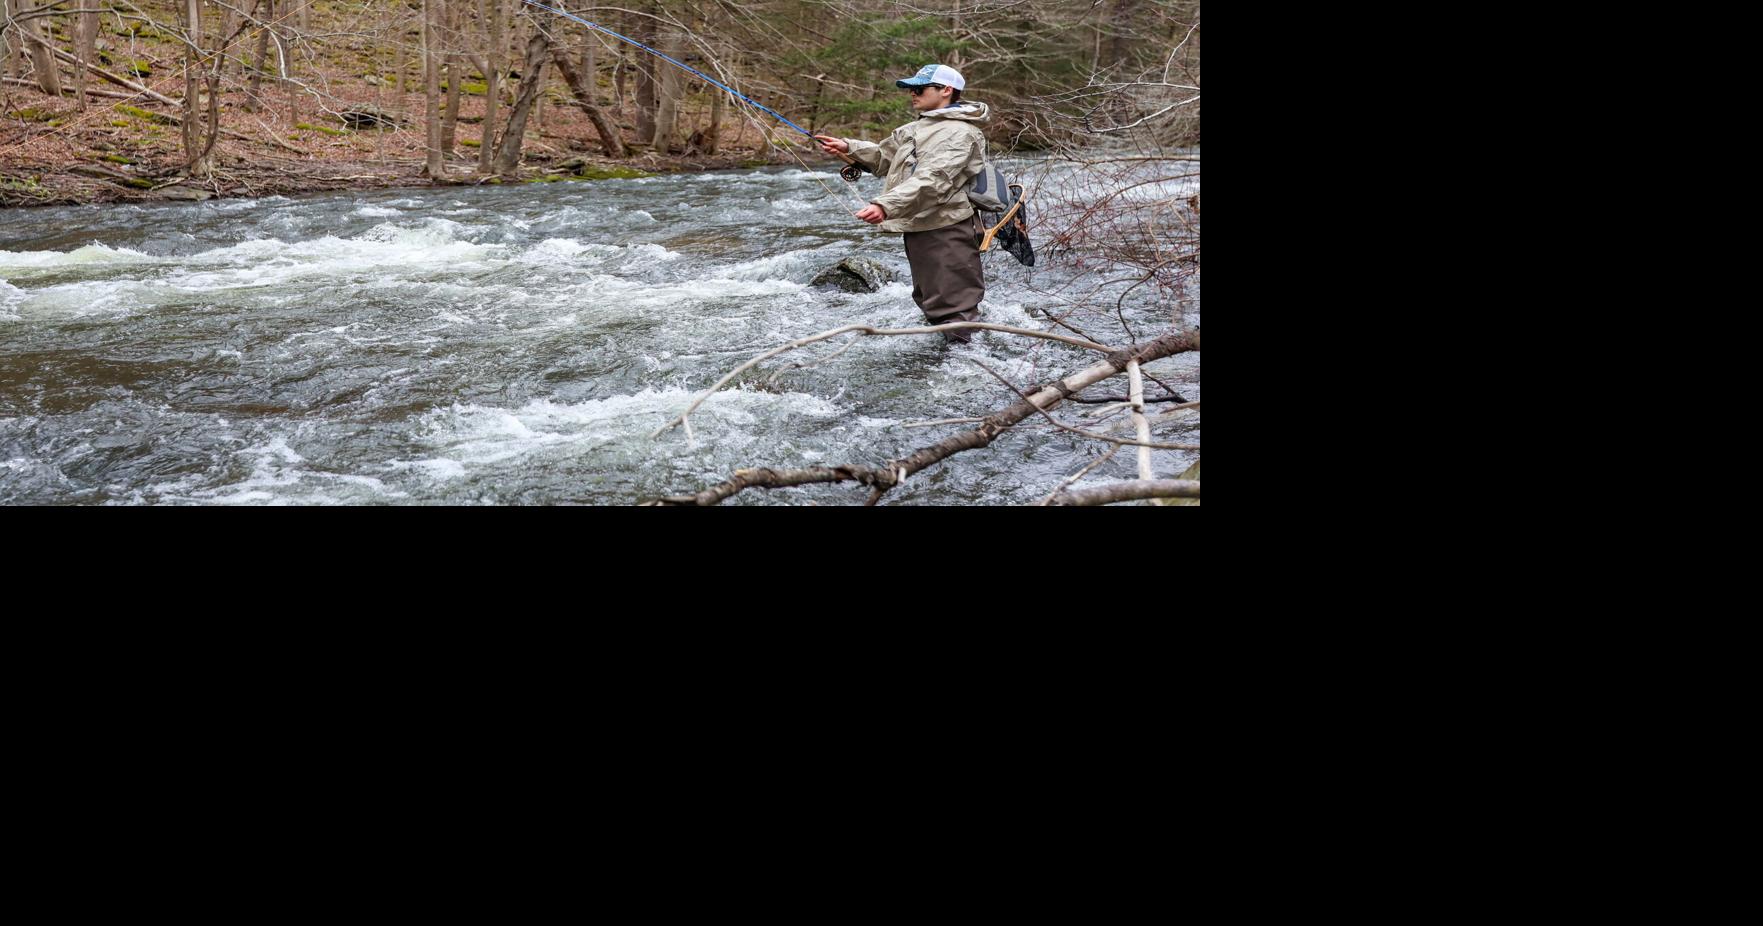 Anglers gear up for chilly, damp trout opener